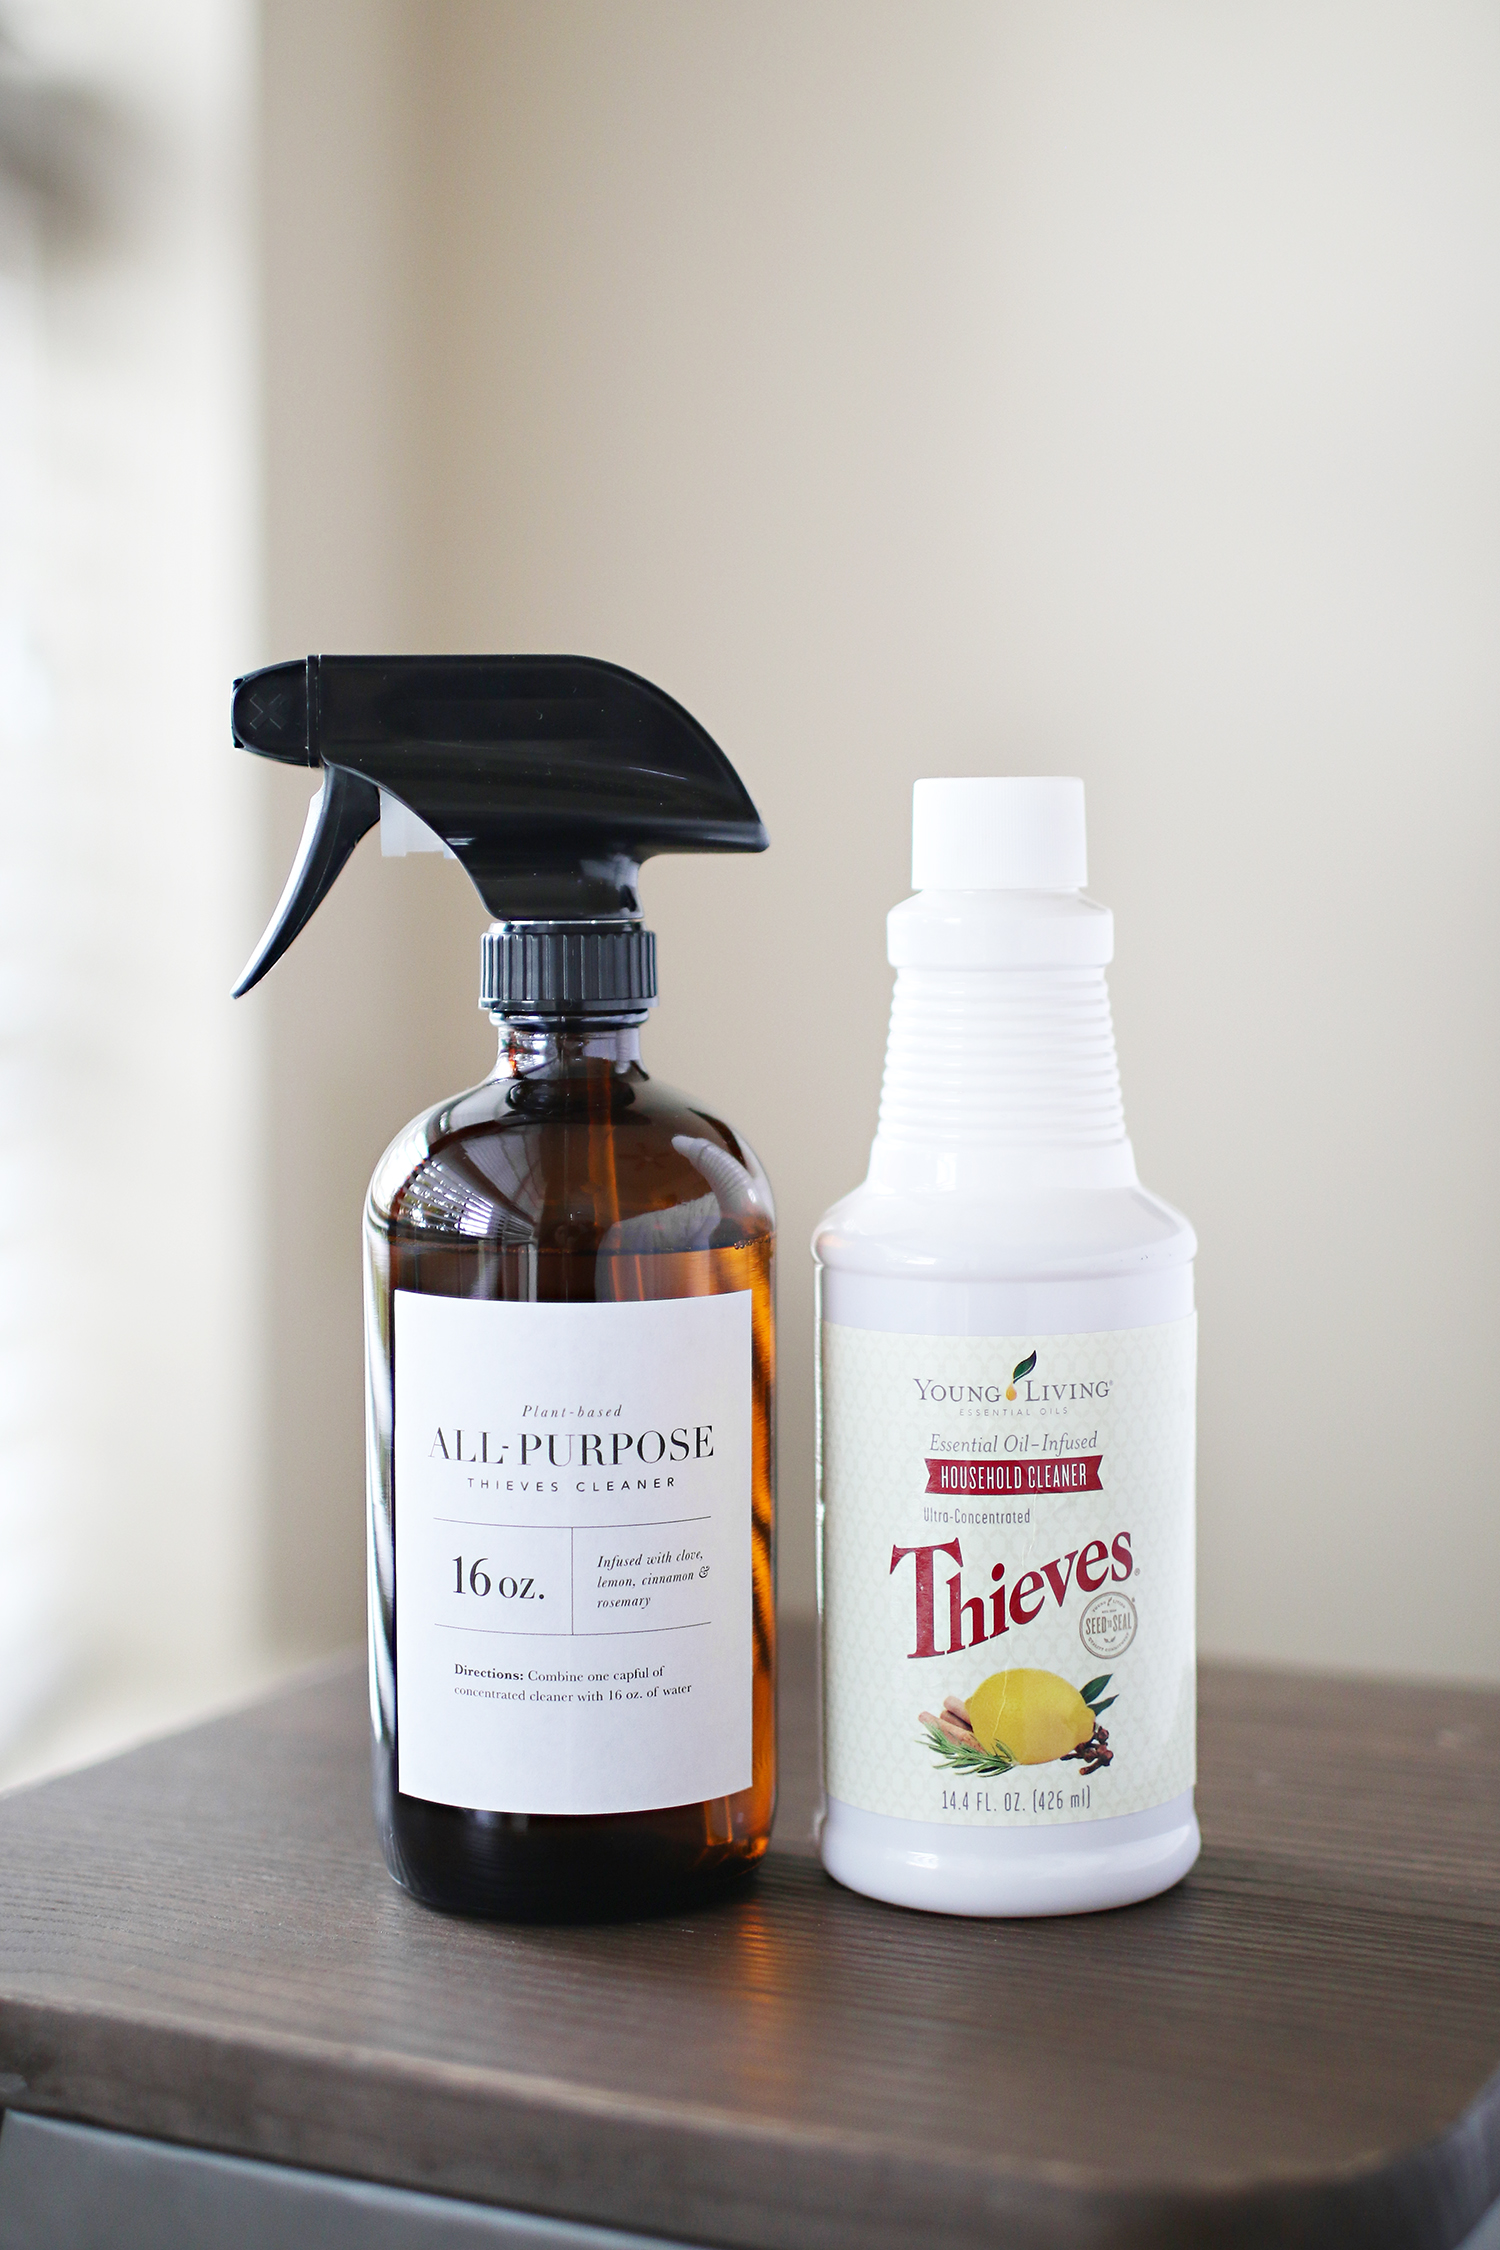 How we are making our home safer with non-toxic cleaning solutions. I have loved approaching this in a healthier way and our family is benefiting so much from a safer home! Catch how we are doing it as well as my free label printable over on Haus of Layne! #CleanLifestyleTips #ToxicFreeHome #NonToxicHome #ToxicFreeCleaningProducts #Thieves #ThievesCleaner #BottleLabel #PrintableLabel